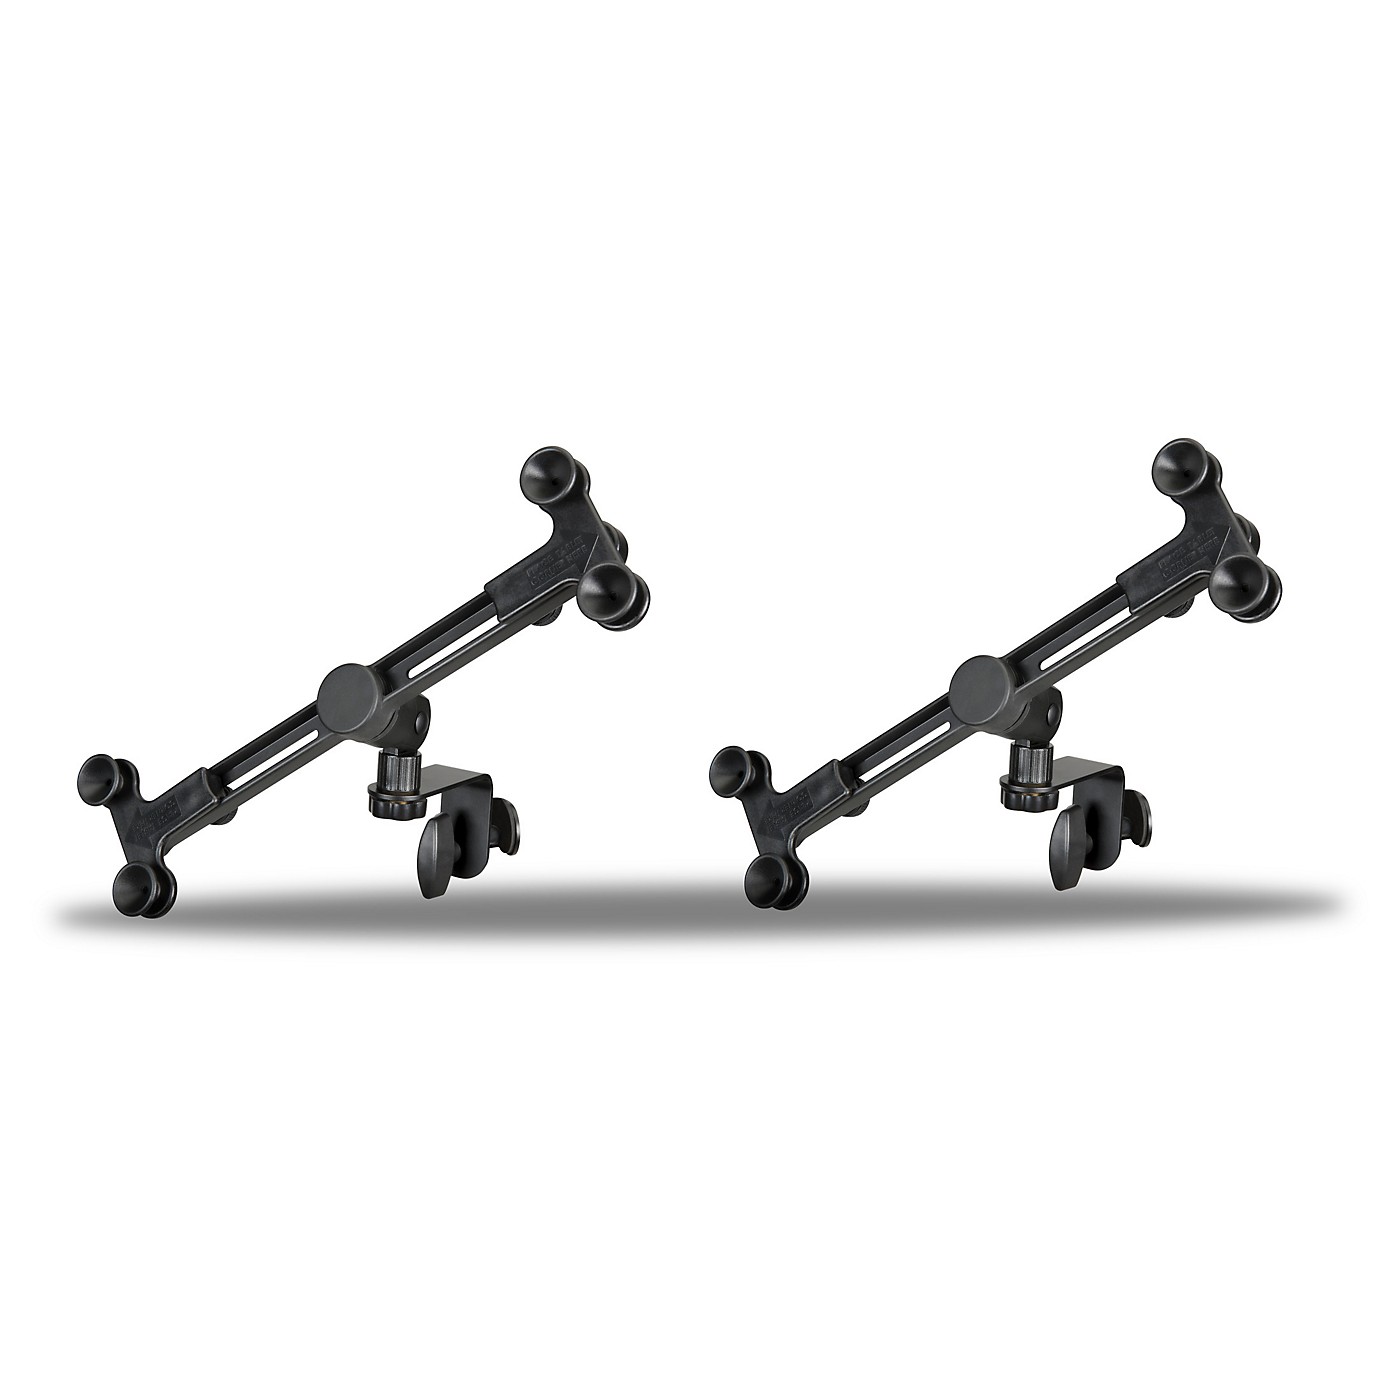 Proline PLUTM2 Universal Tablet Mount With Stand Attachment 2-Pack thumbnail